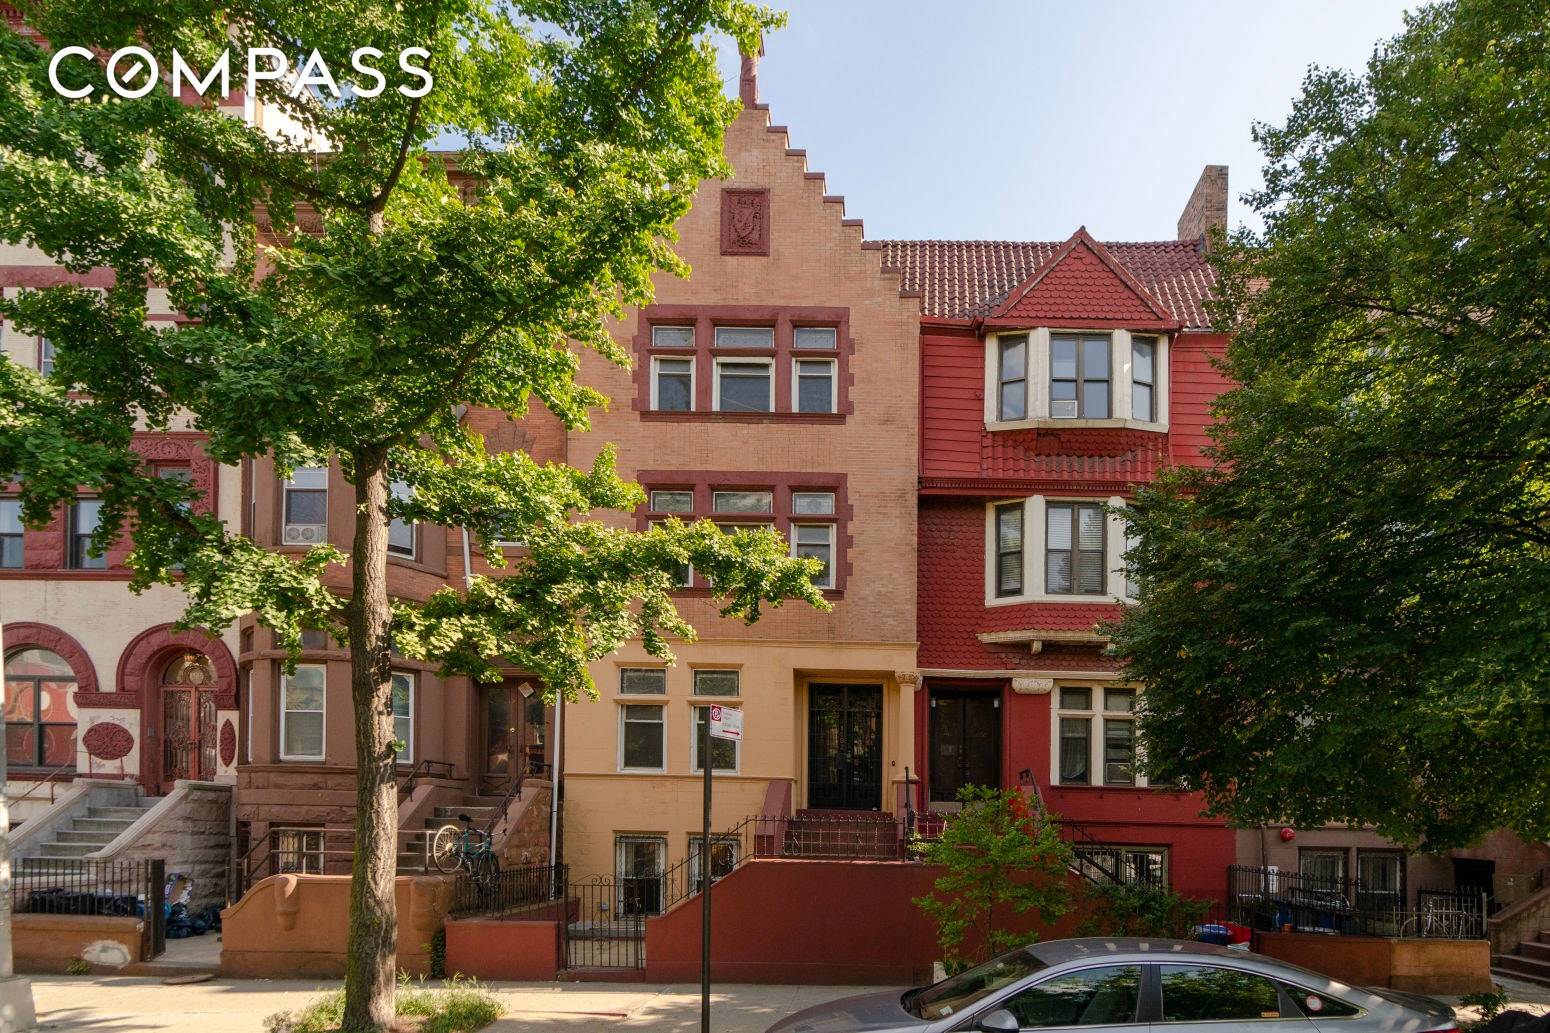 This rare gem designed by George Chappell located in the north historic district of Crown Heights is an unusual find.